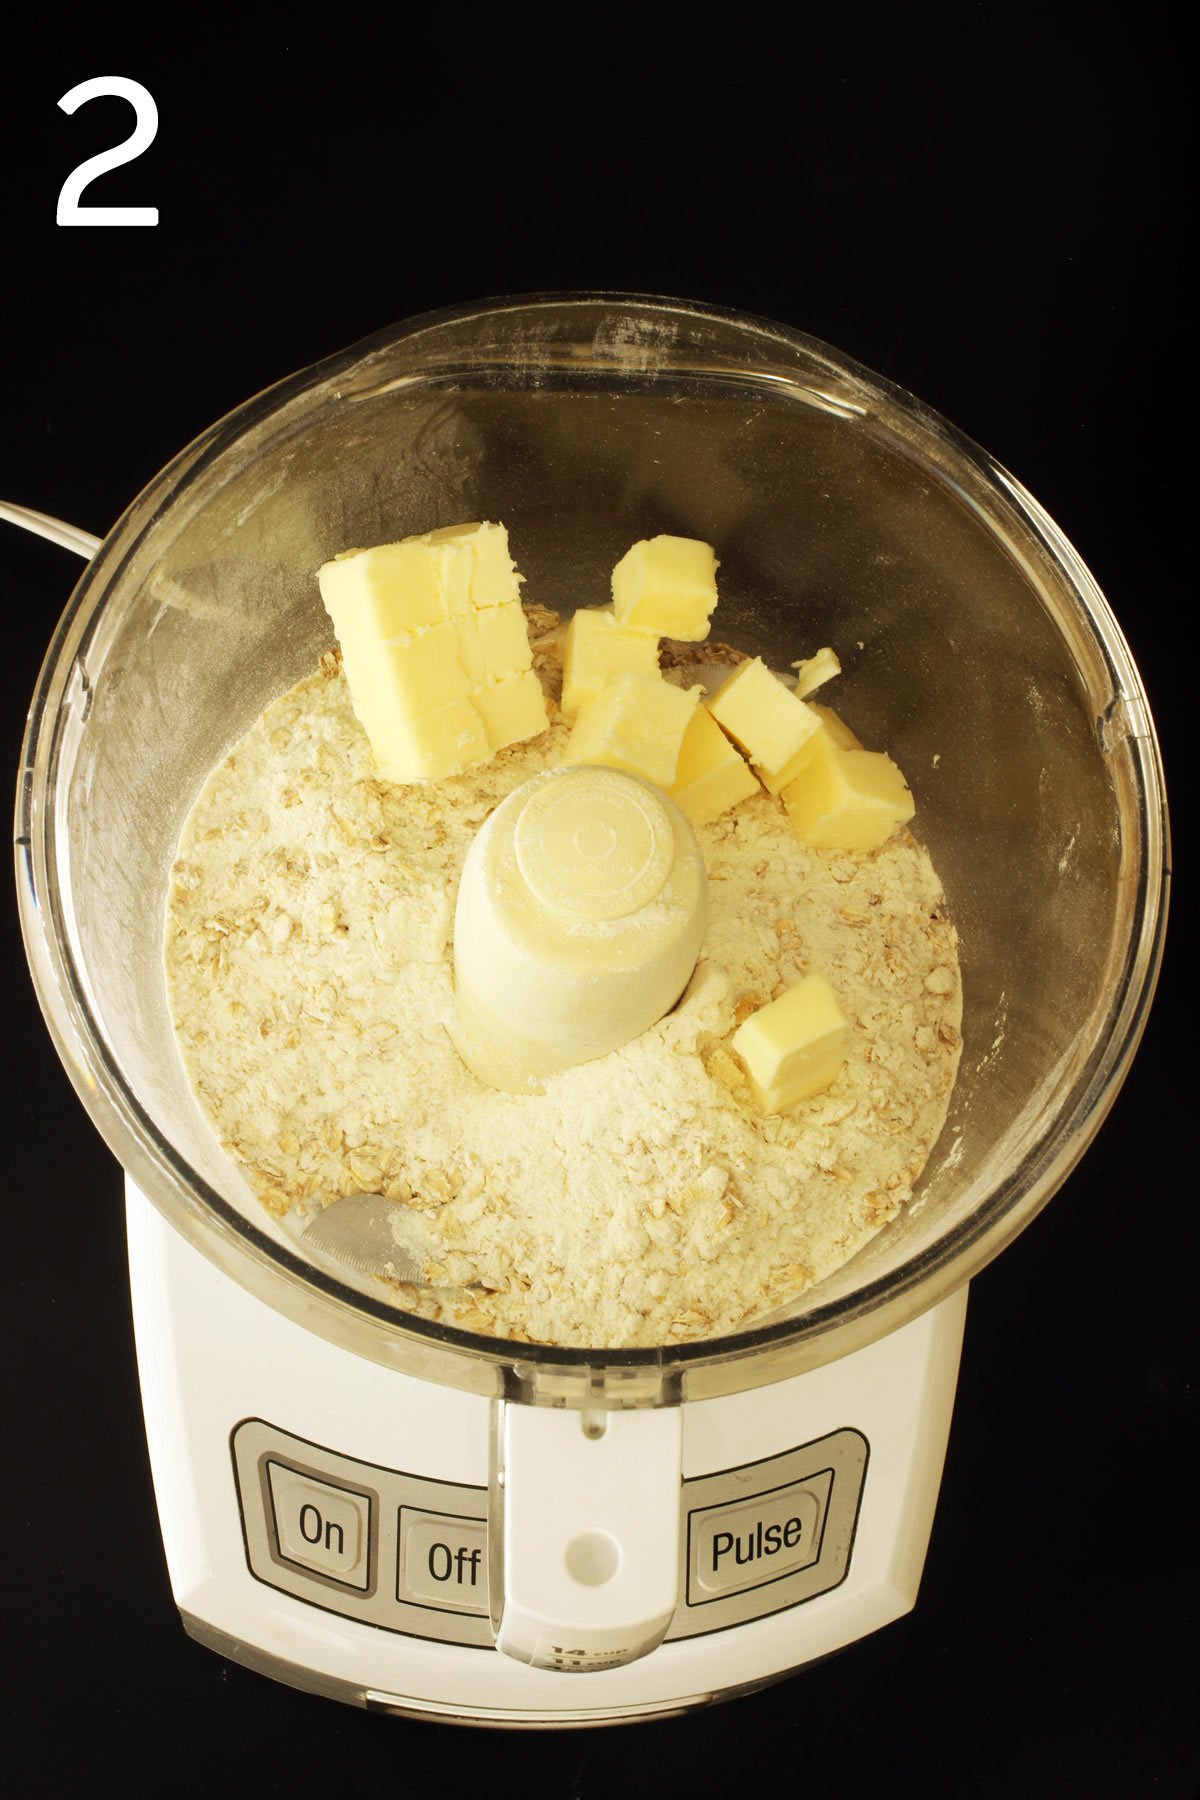 adding butter cubes to the food processor.